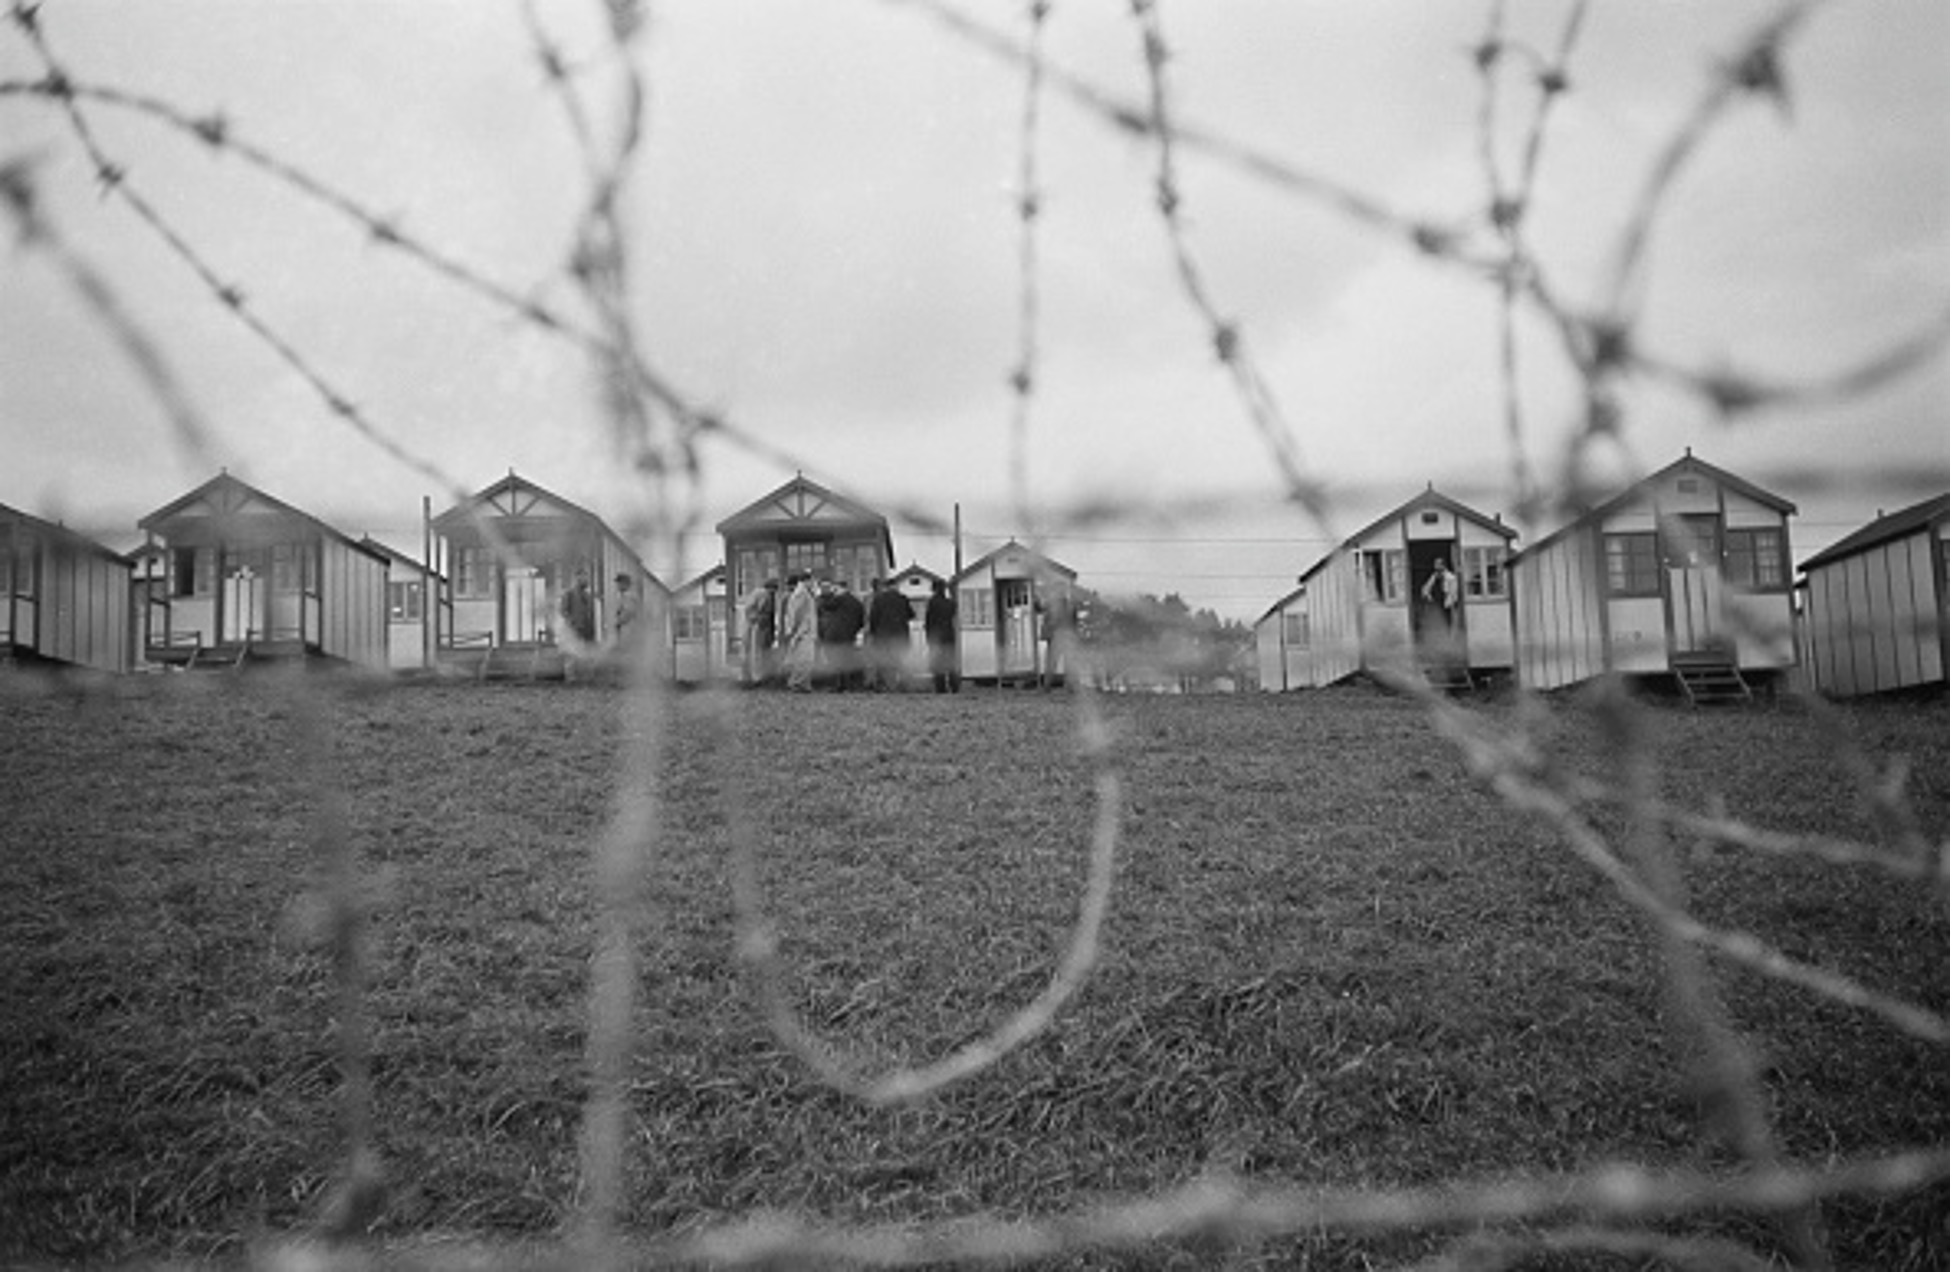 Black and white photograph of an internment camp in England seen through barbed wire, c. 1940